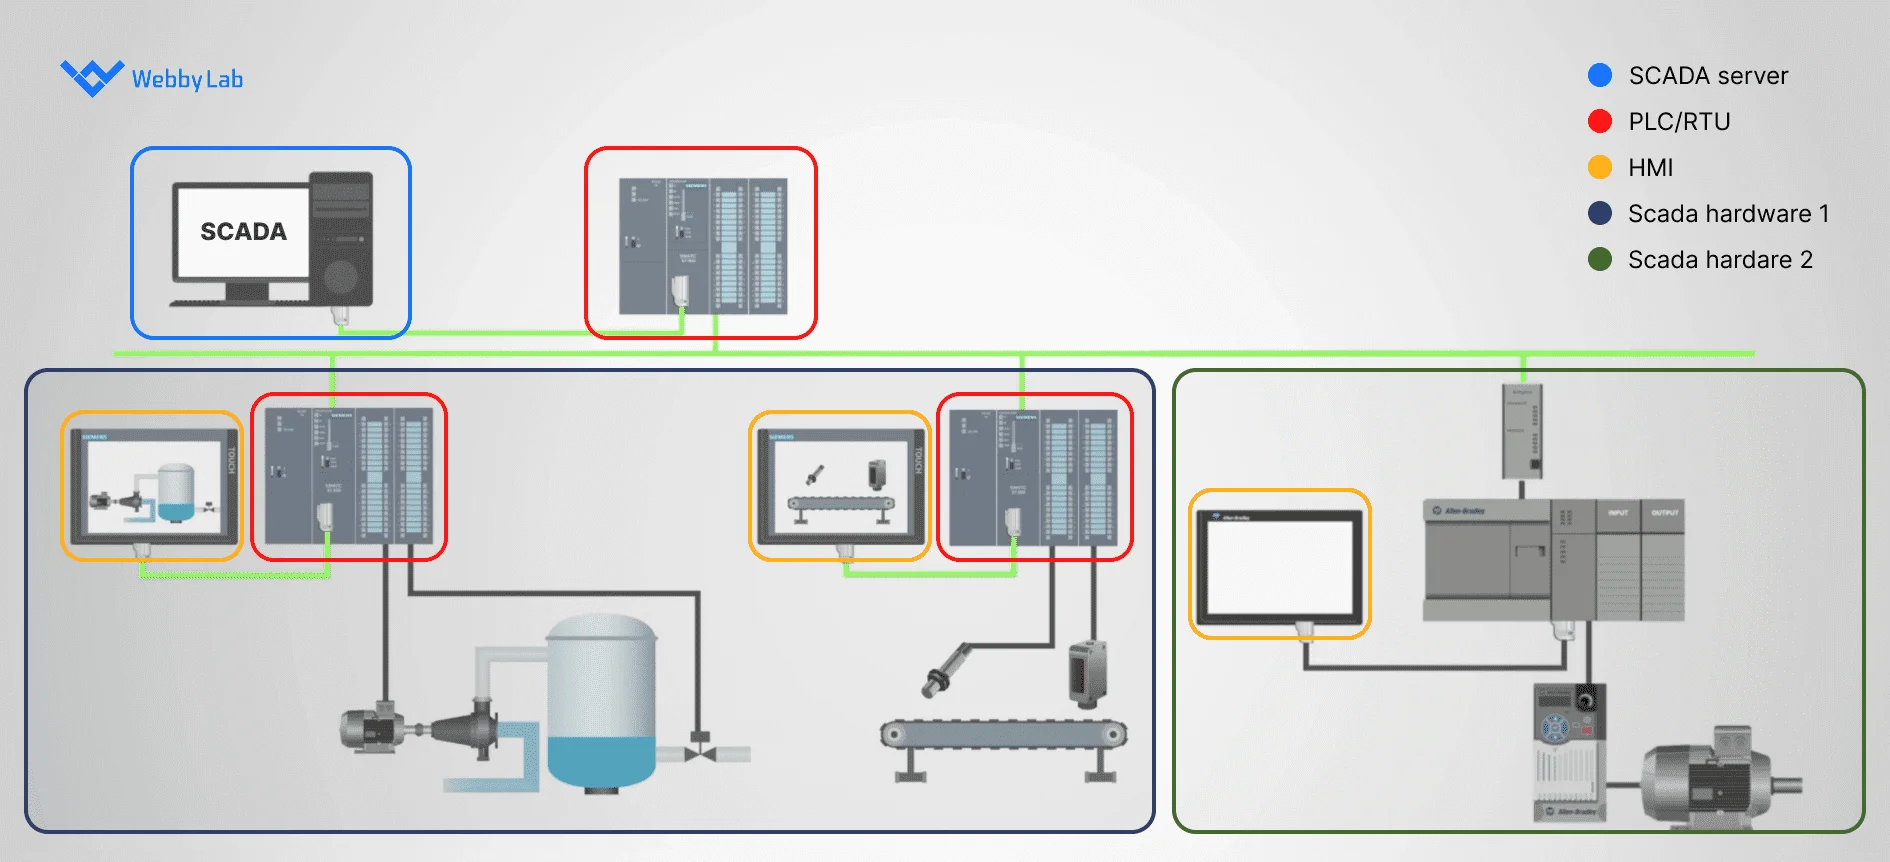 A SCADA system with two solutions from one manufacturer and one from another before using IoT in SCADA.